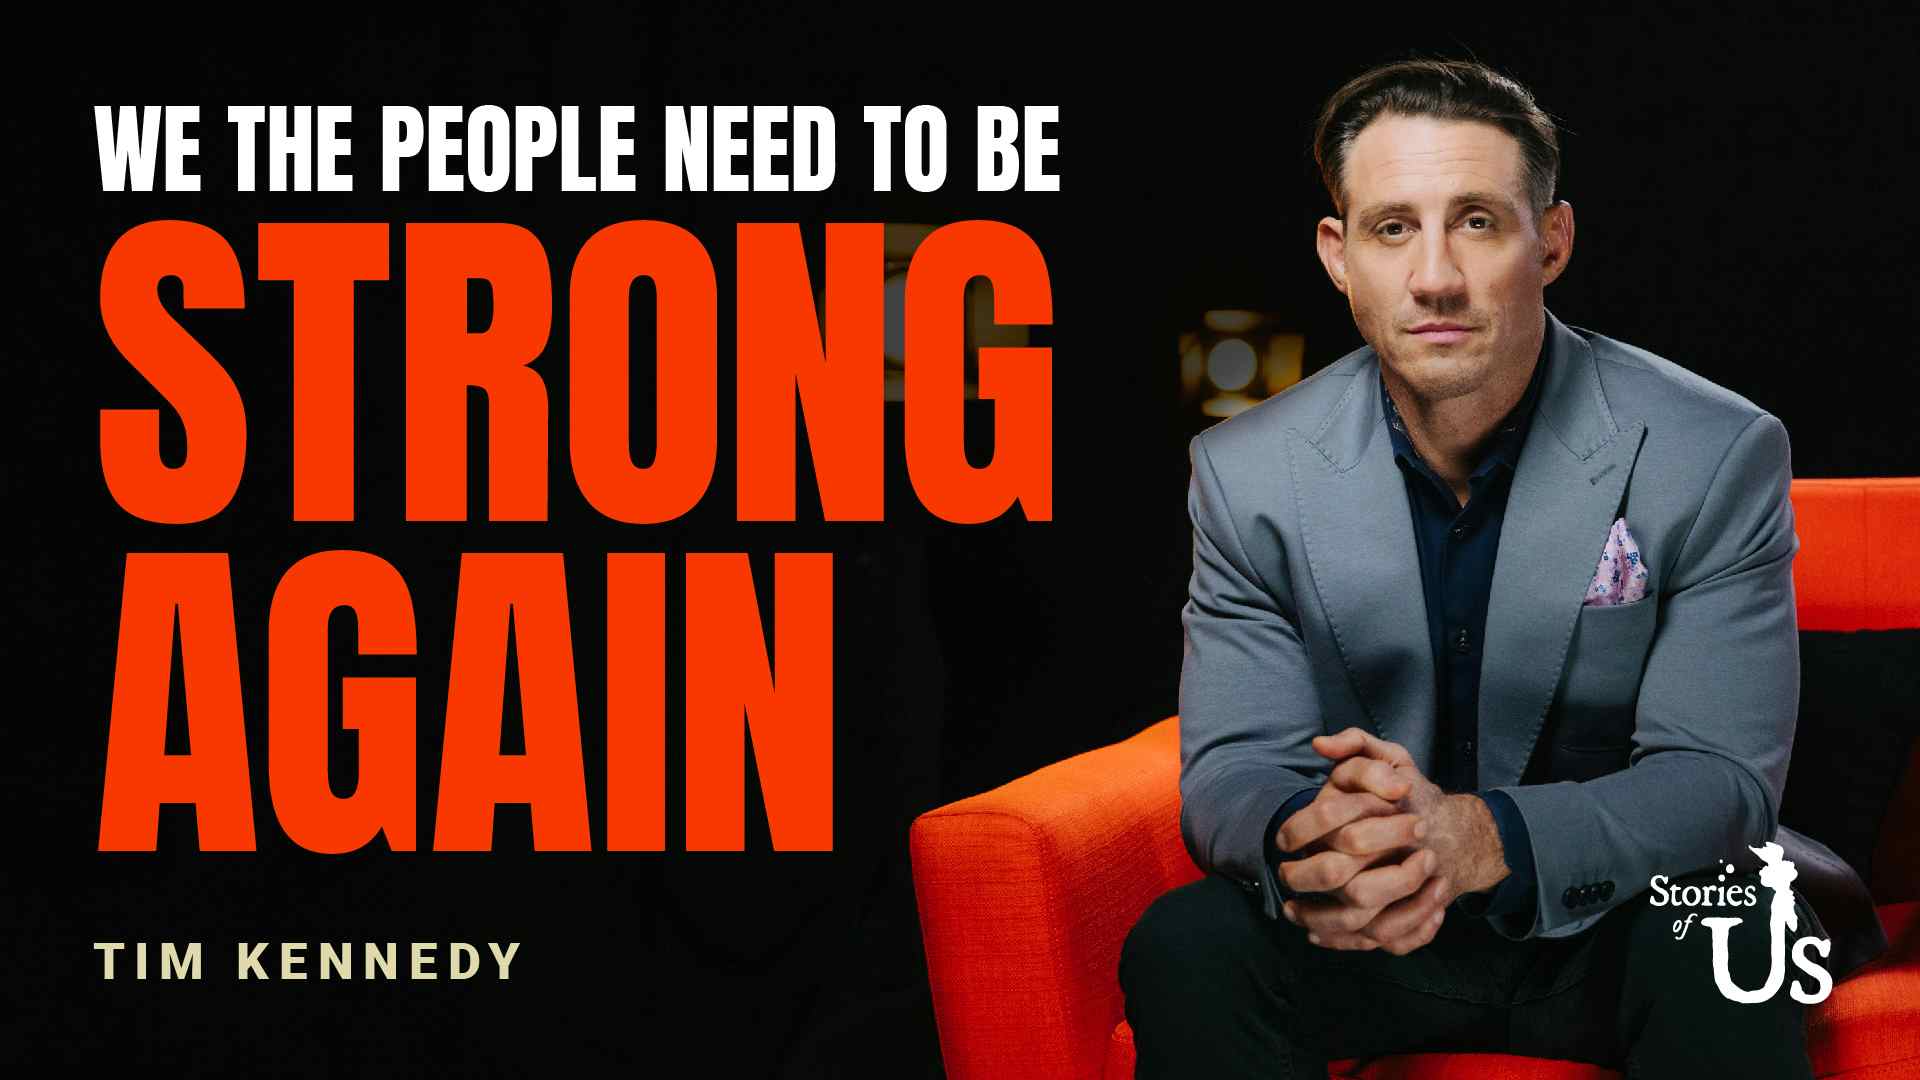 Tim Kennedy: We the People Need to Be Strong Again